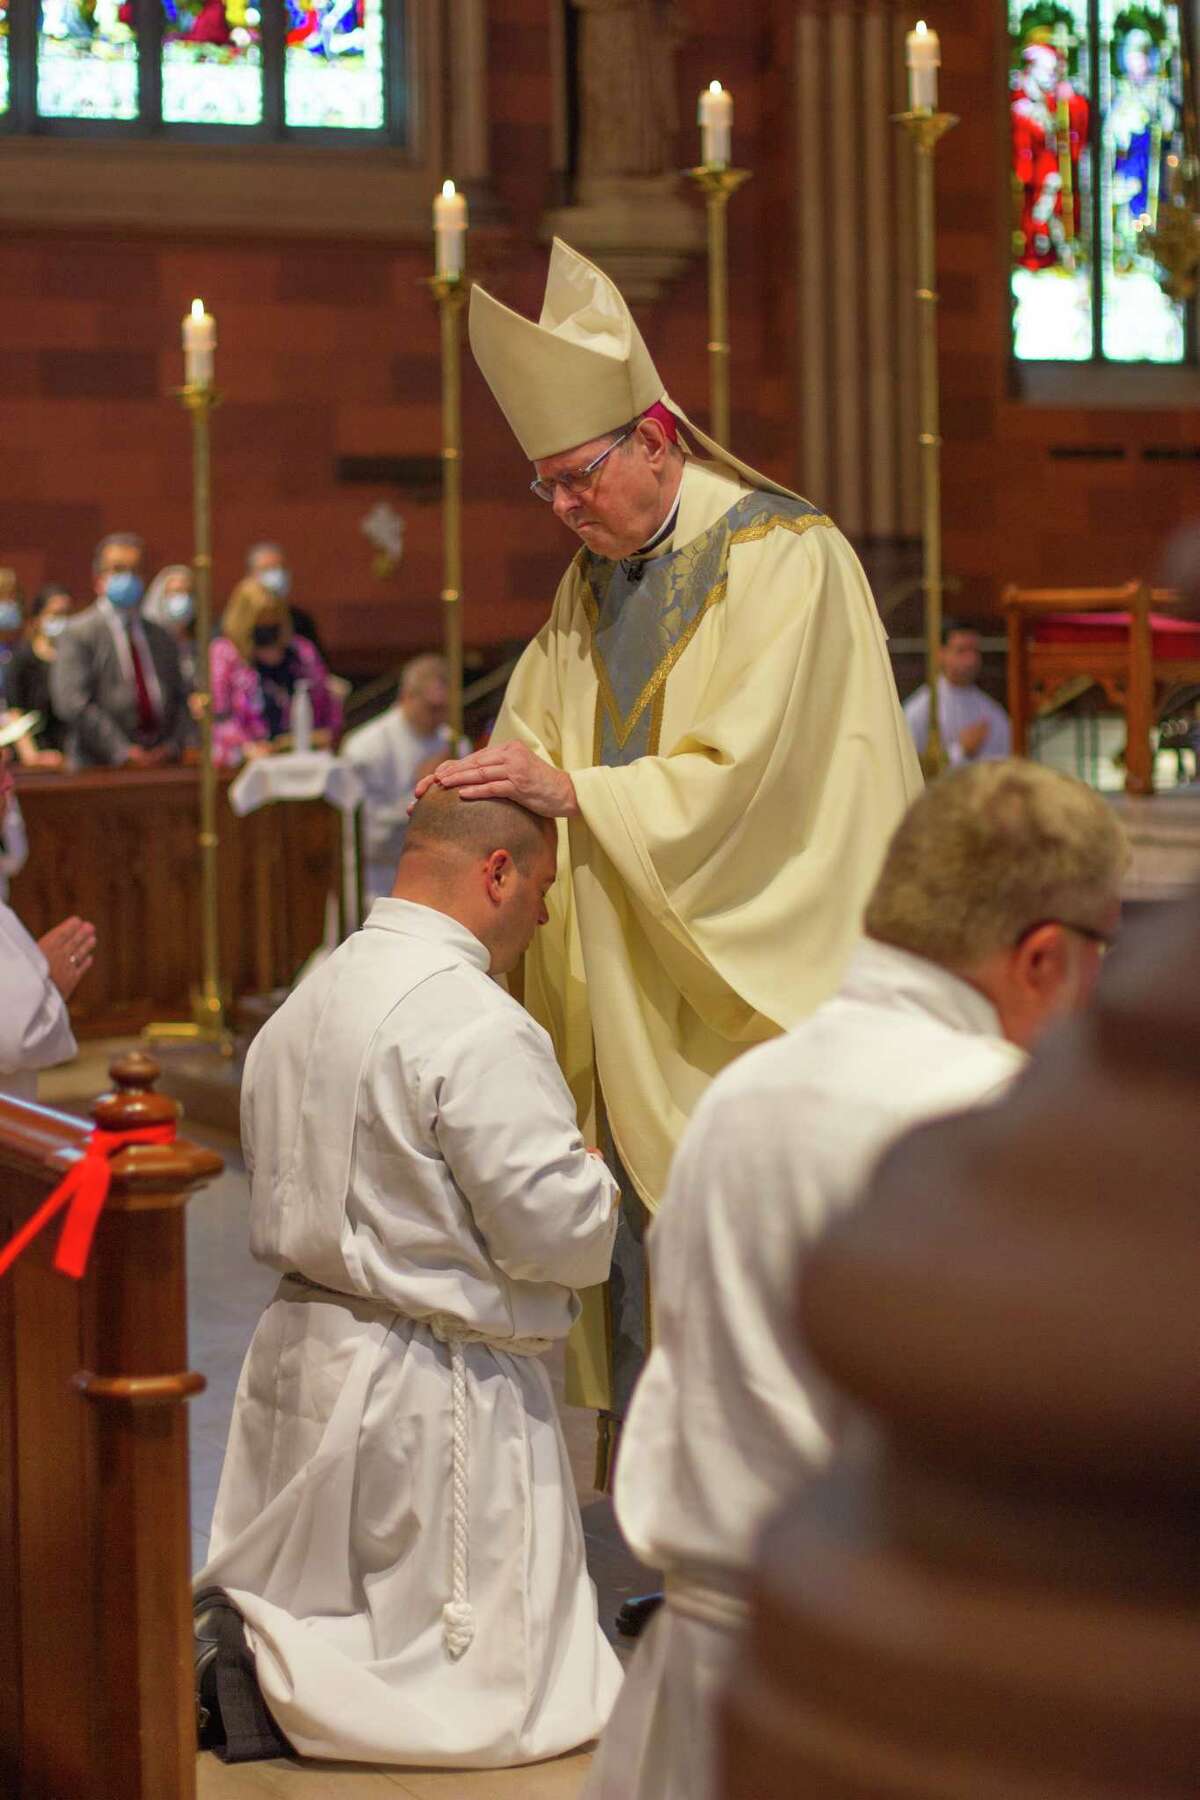 Scene from the ordination ceremony. (Kate Costello)